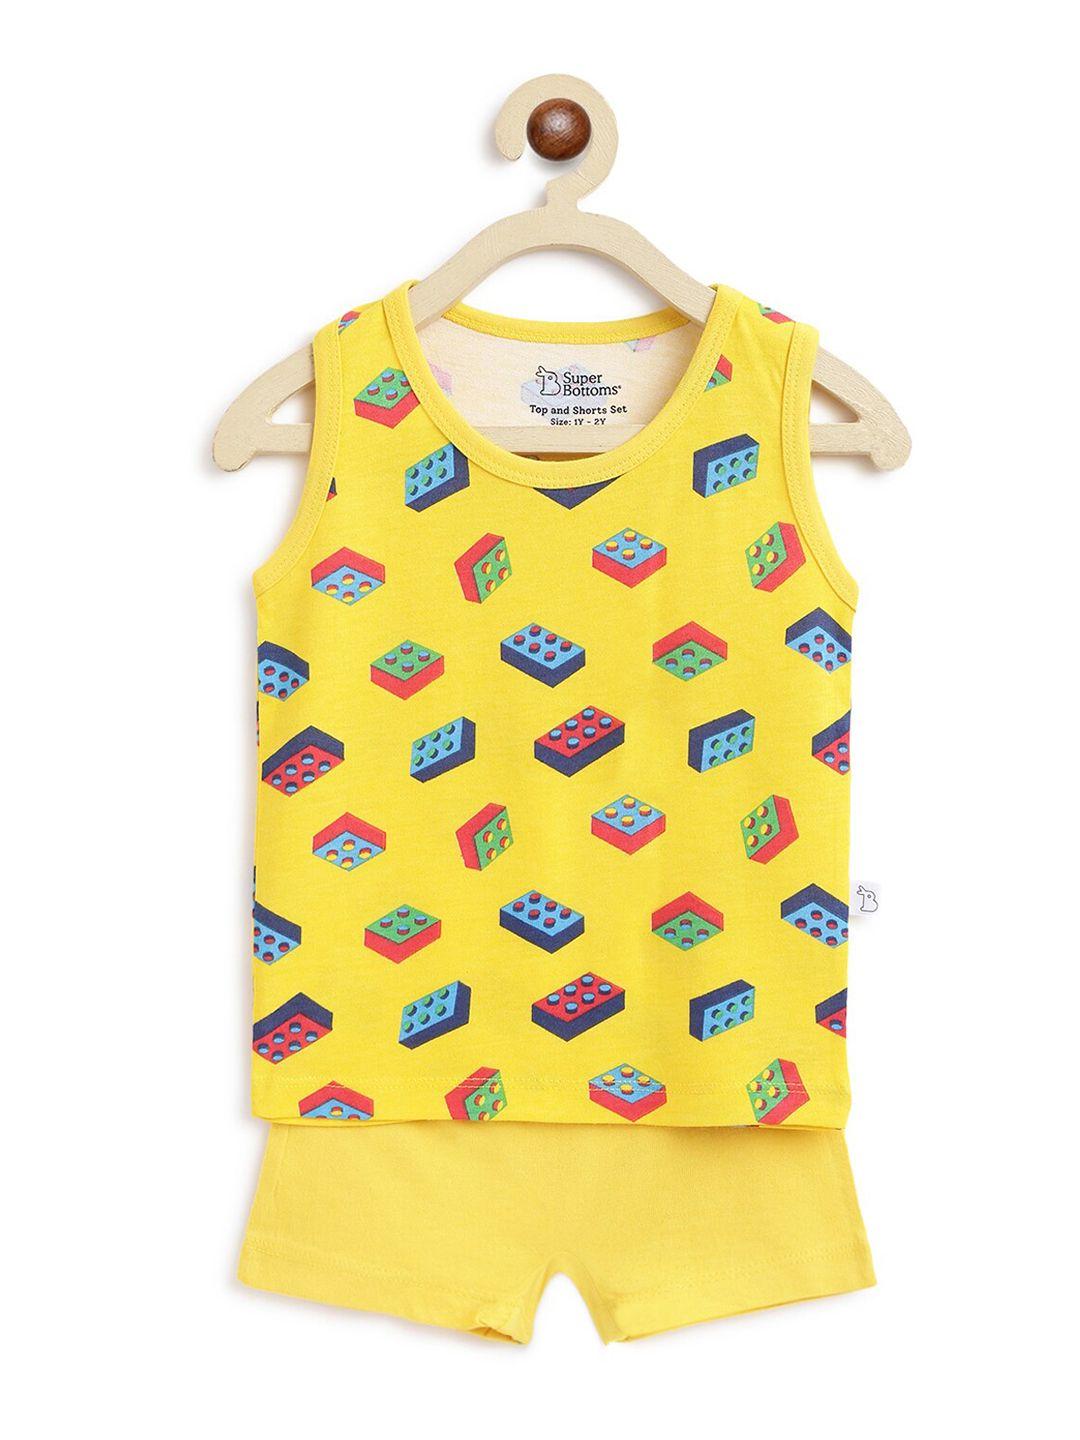 superbottoms kids yellow & green printed sustainable t-shirt with shorts